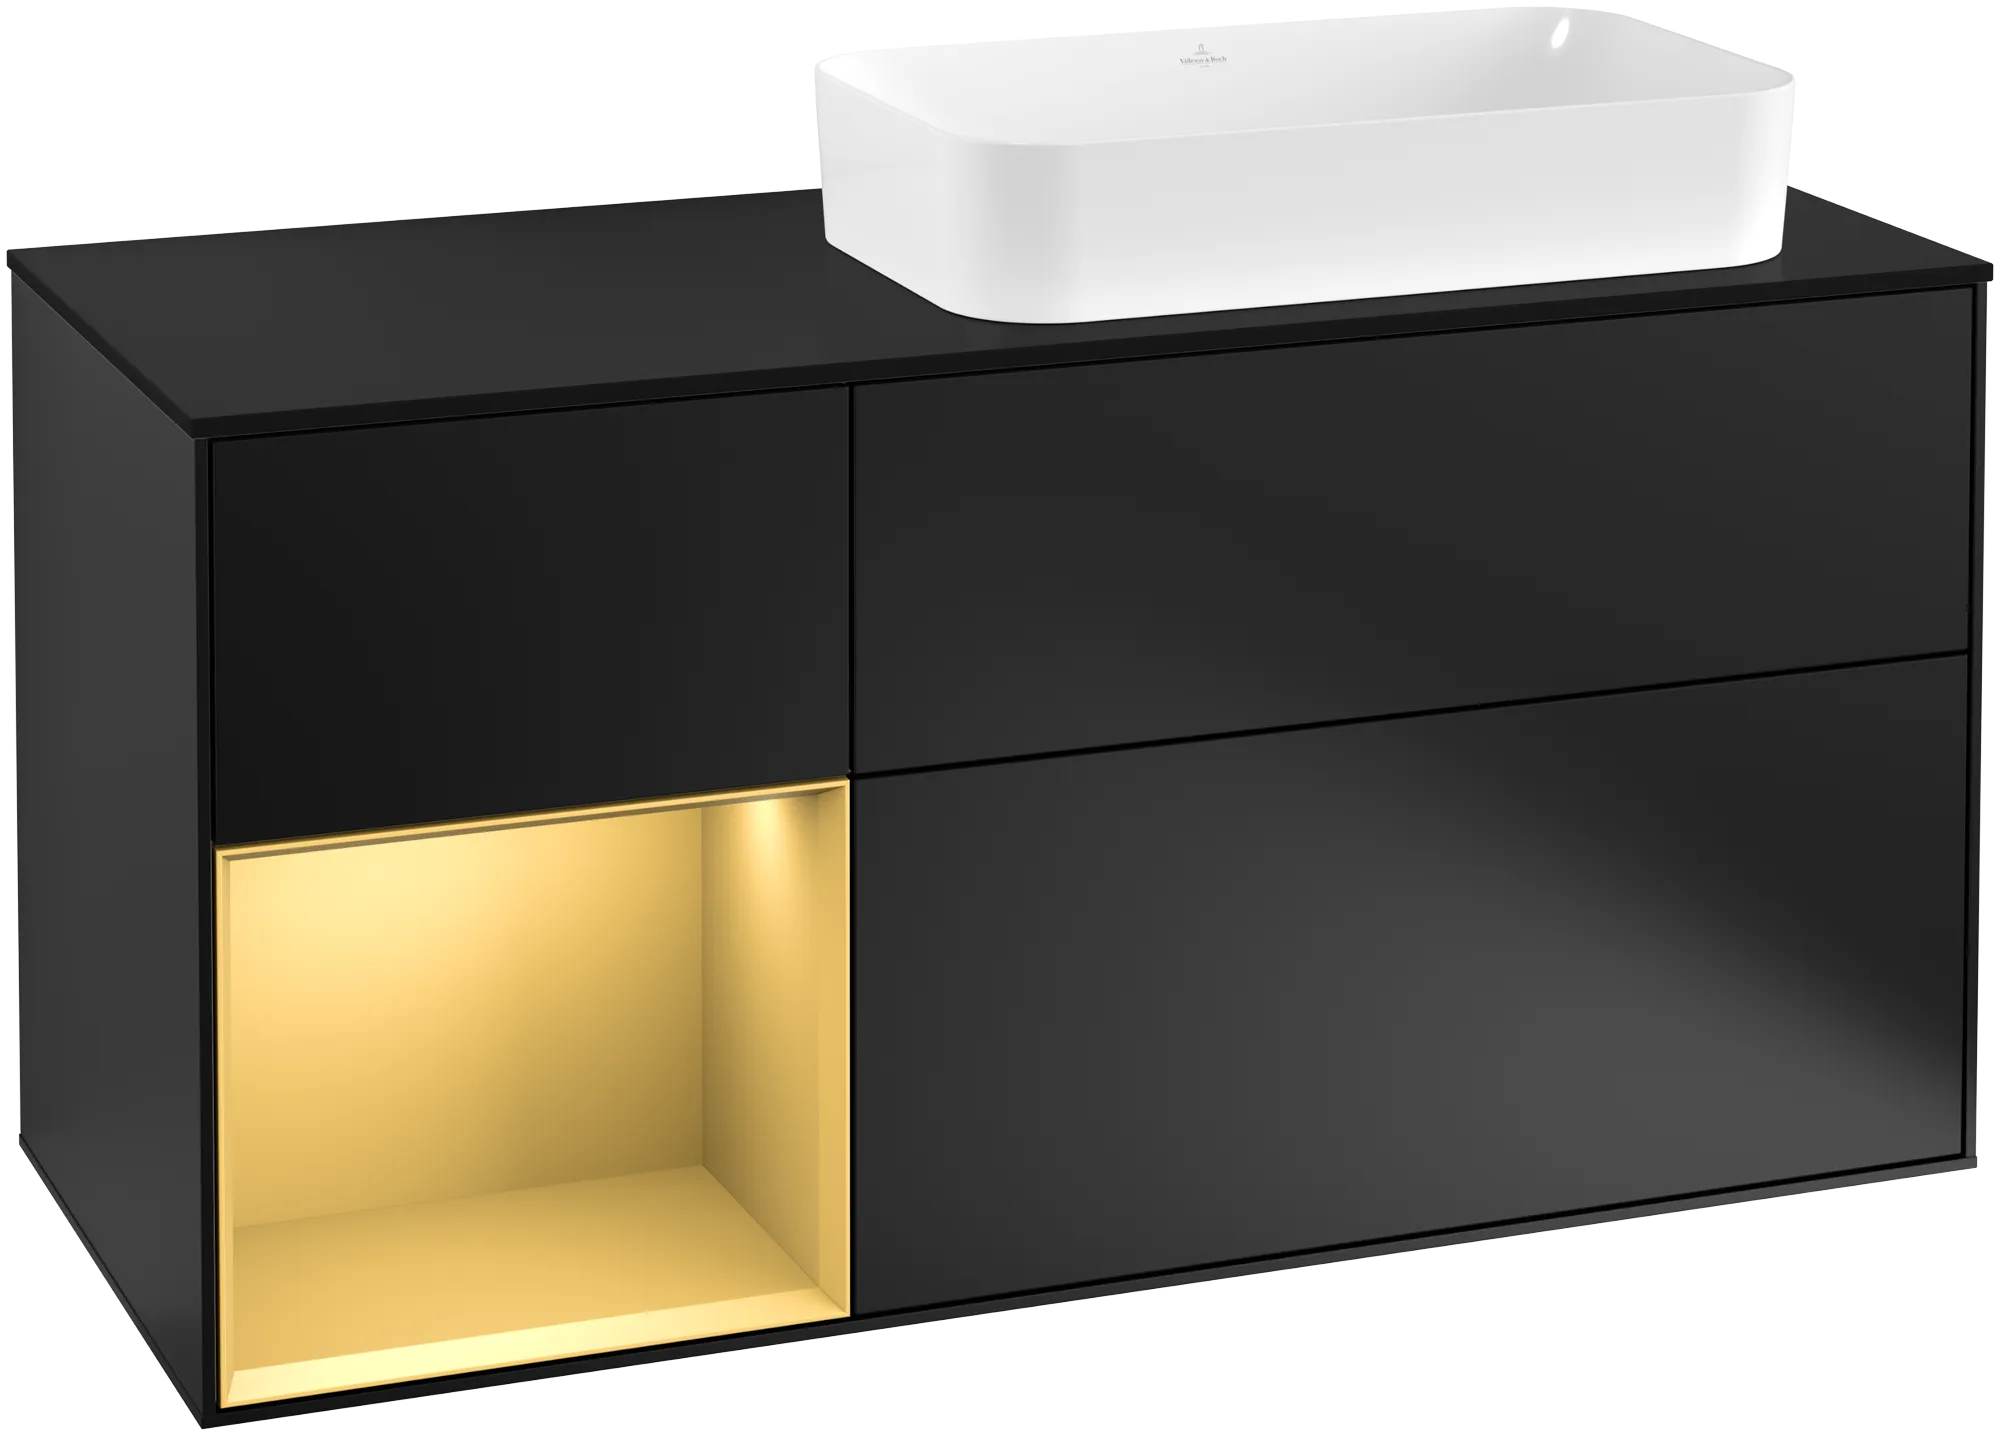 Picture of VILLEROY BOCH Finion Vanity unit, with lighting, 3 pull-out compartments, 1200 x 603 x 501 mm, Black Matt Lacquer / Gold Matt Lacquer / Glass Black Matt #G272HFPD